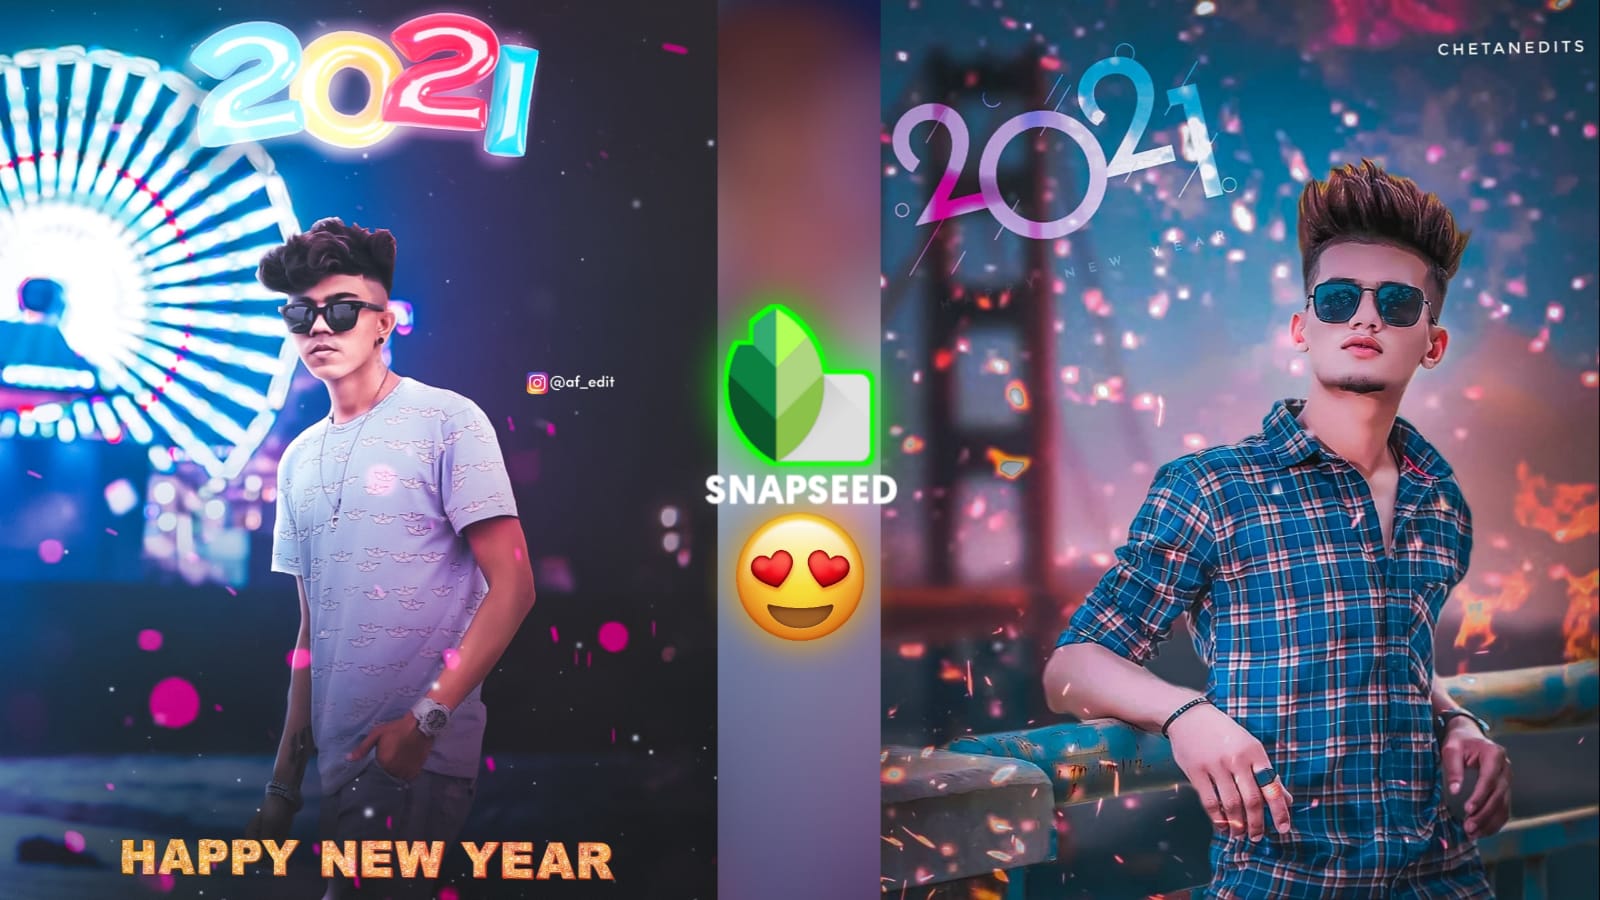 Snapseed Happy New Year Photo Editing - [AF Edit]